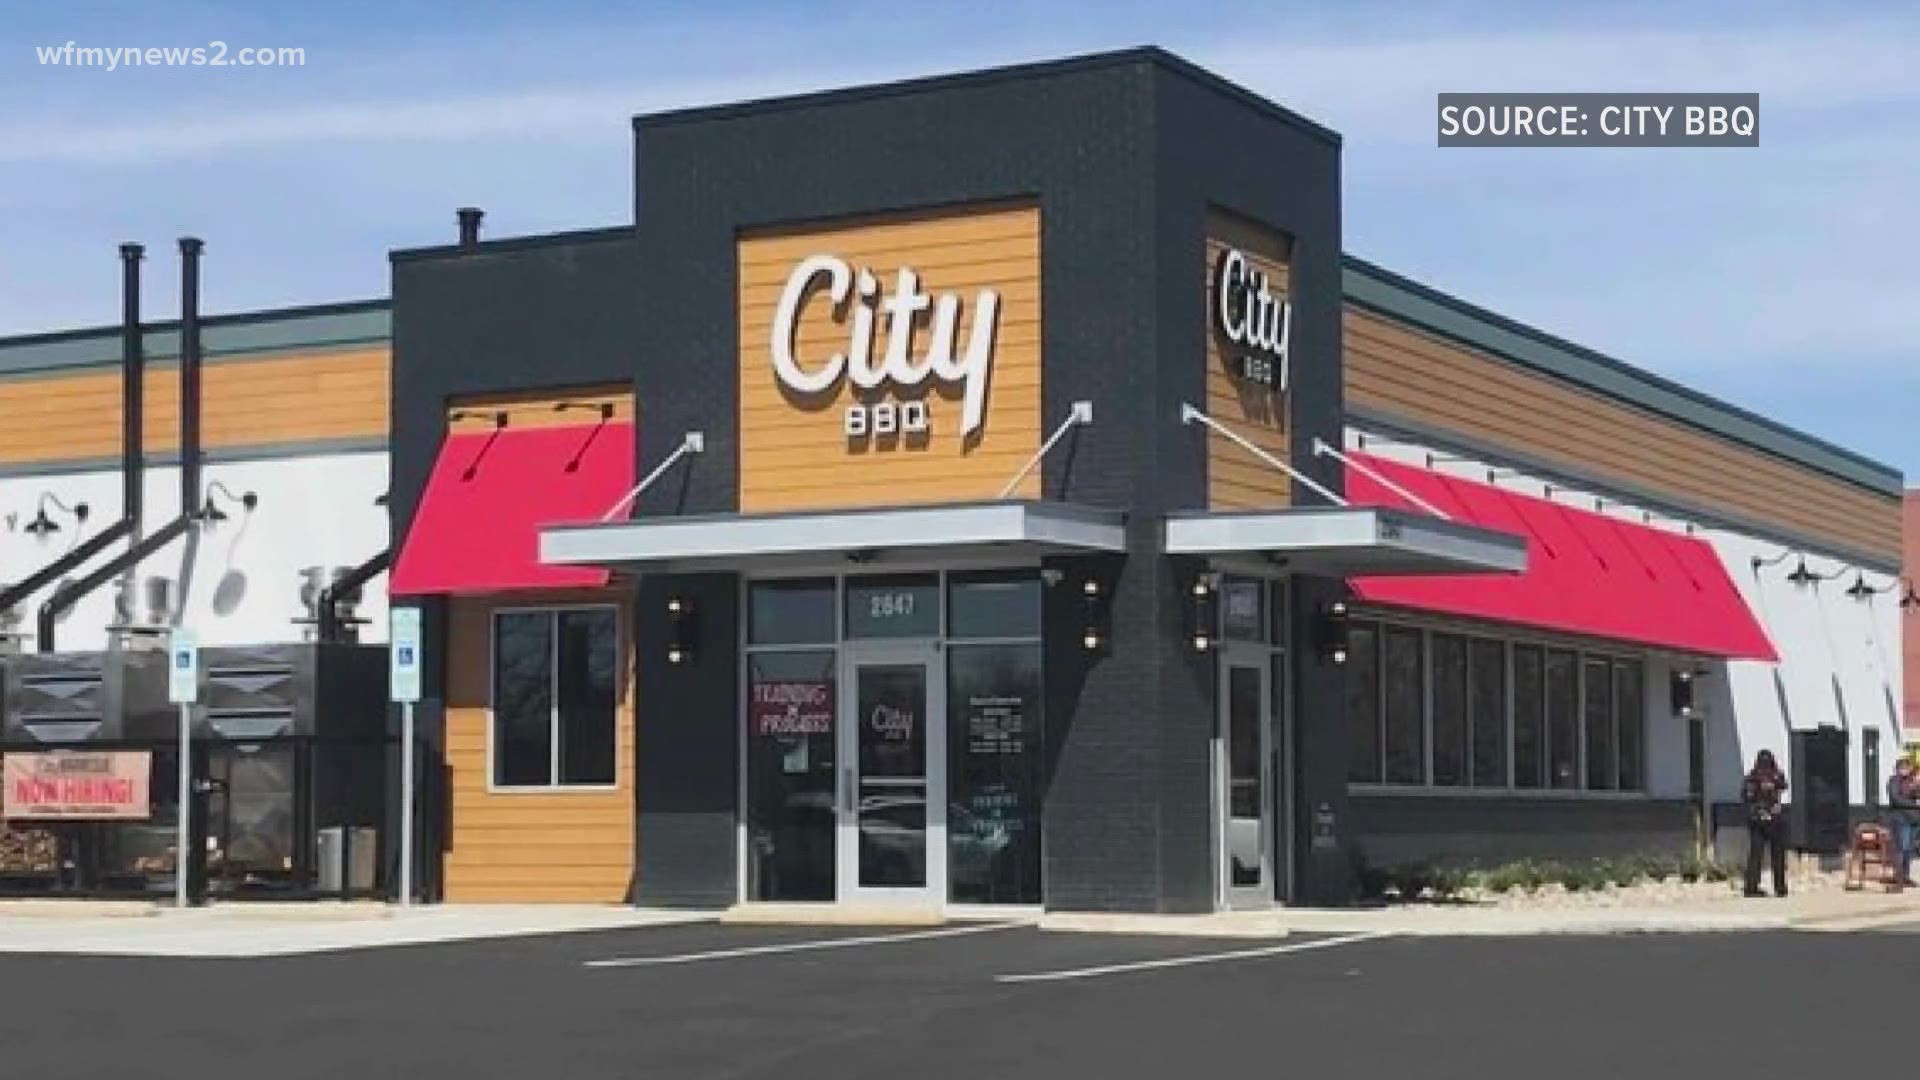 New Barbecue Restaurant Rolls The Dice As The Pandemic Slows Wfmynews2 Com